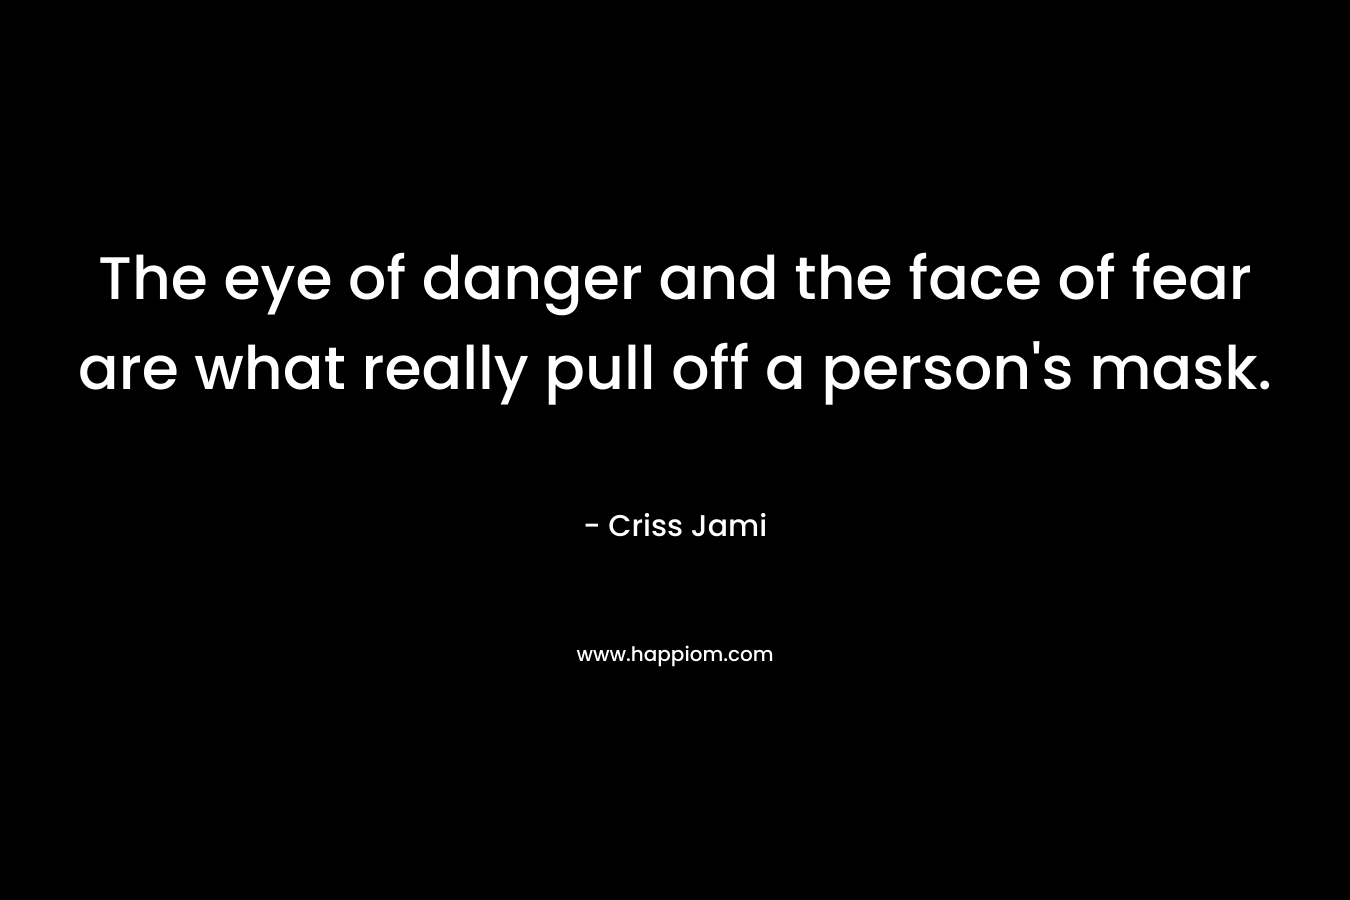 The eye of danger and the face of fear are what really pull off a person's mask.